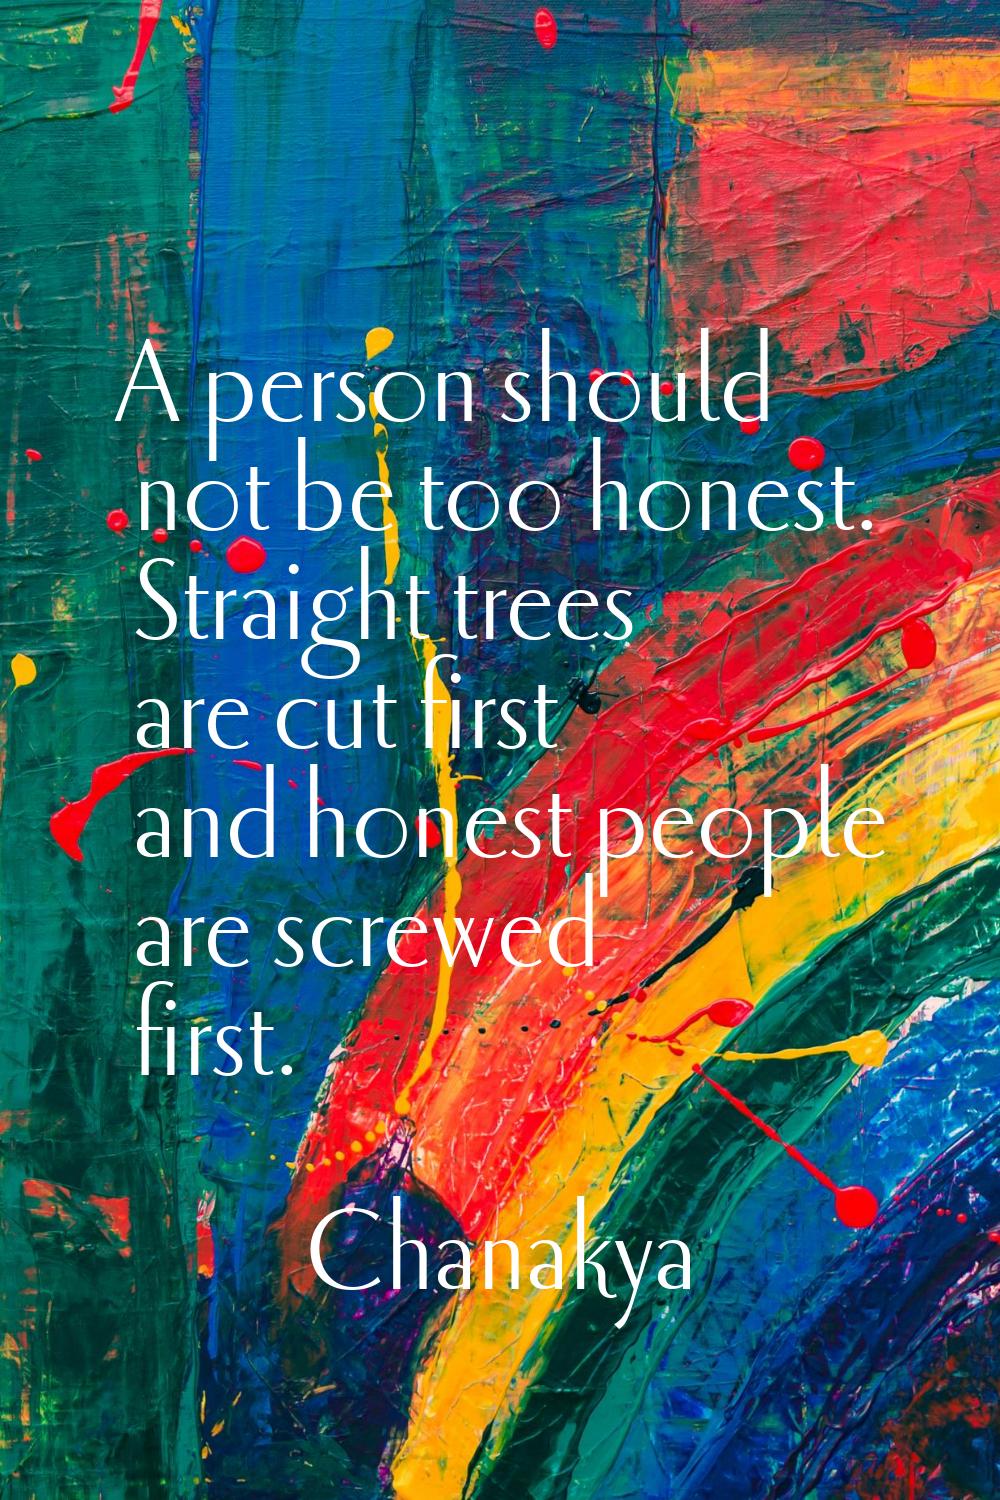 A person should not be too honest. Straight trees are cut first and honest people are screwed first